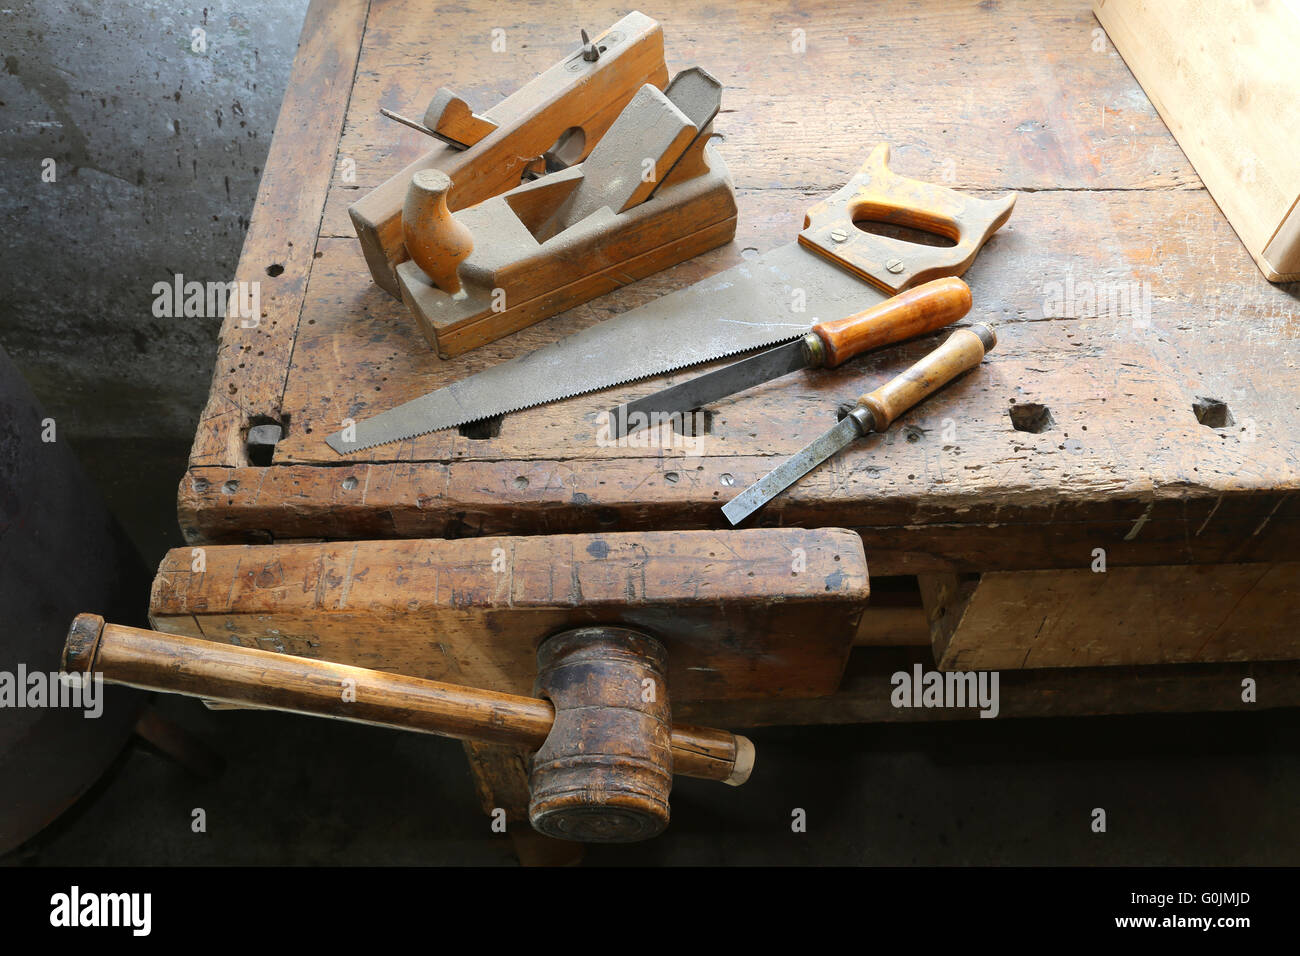 tools  on the Workbench with a wooden grip inside the craftsman joinery manufacturer Stock Photo